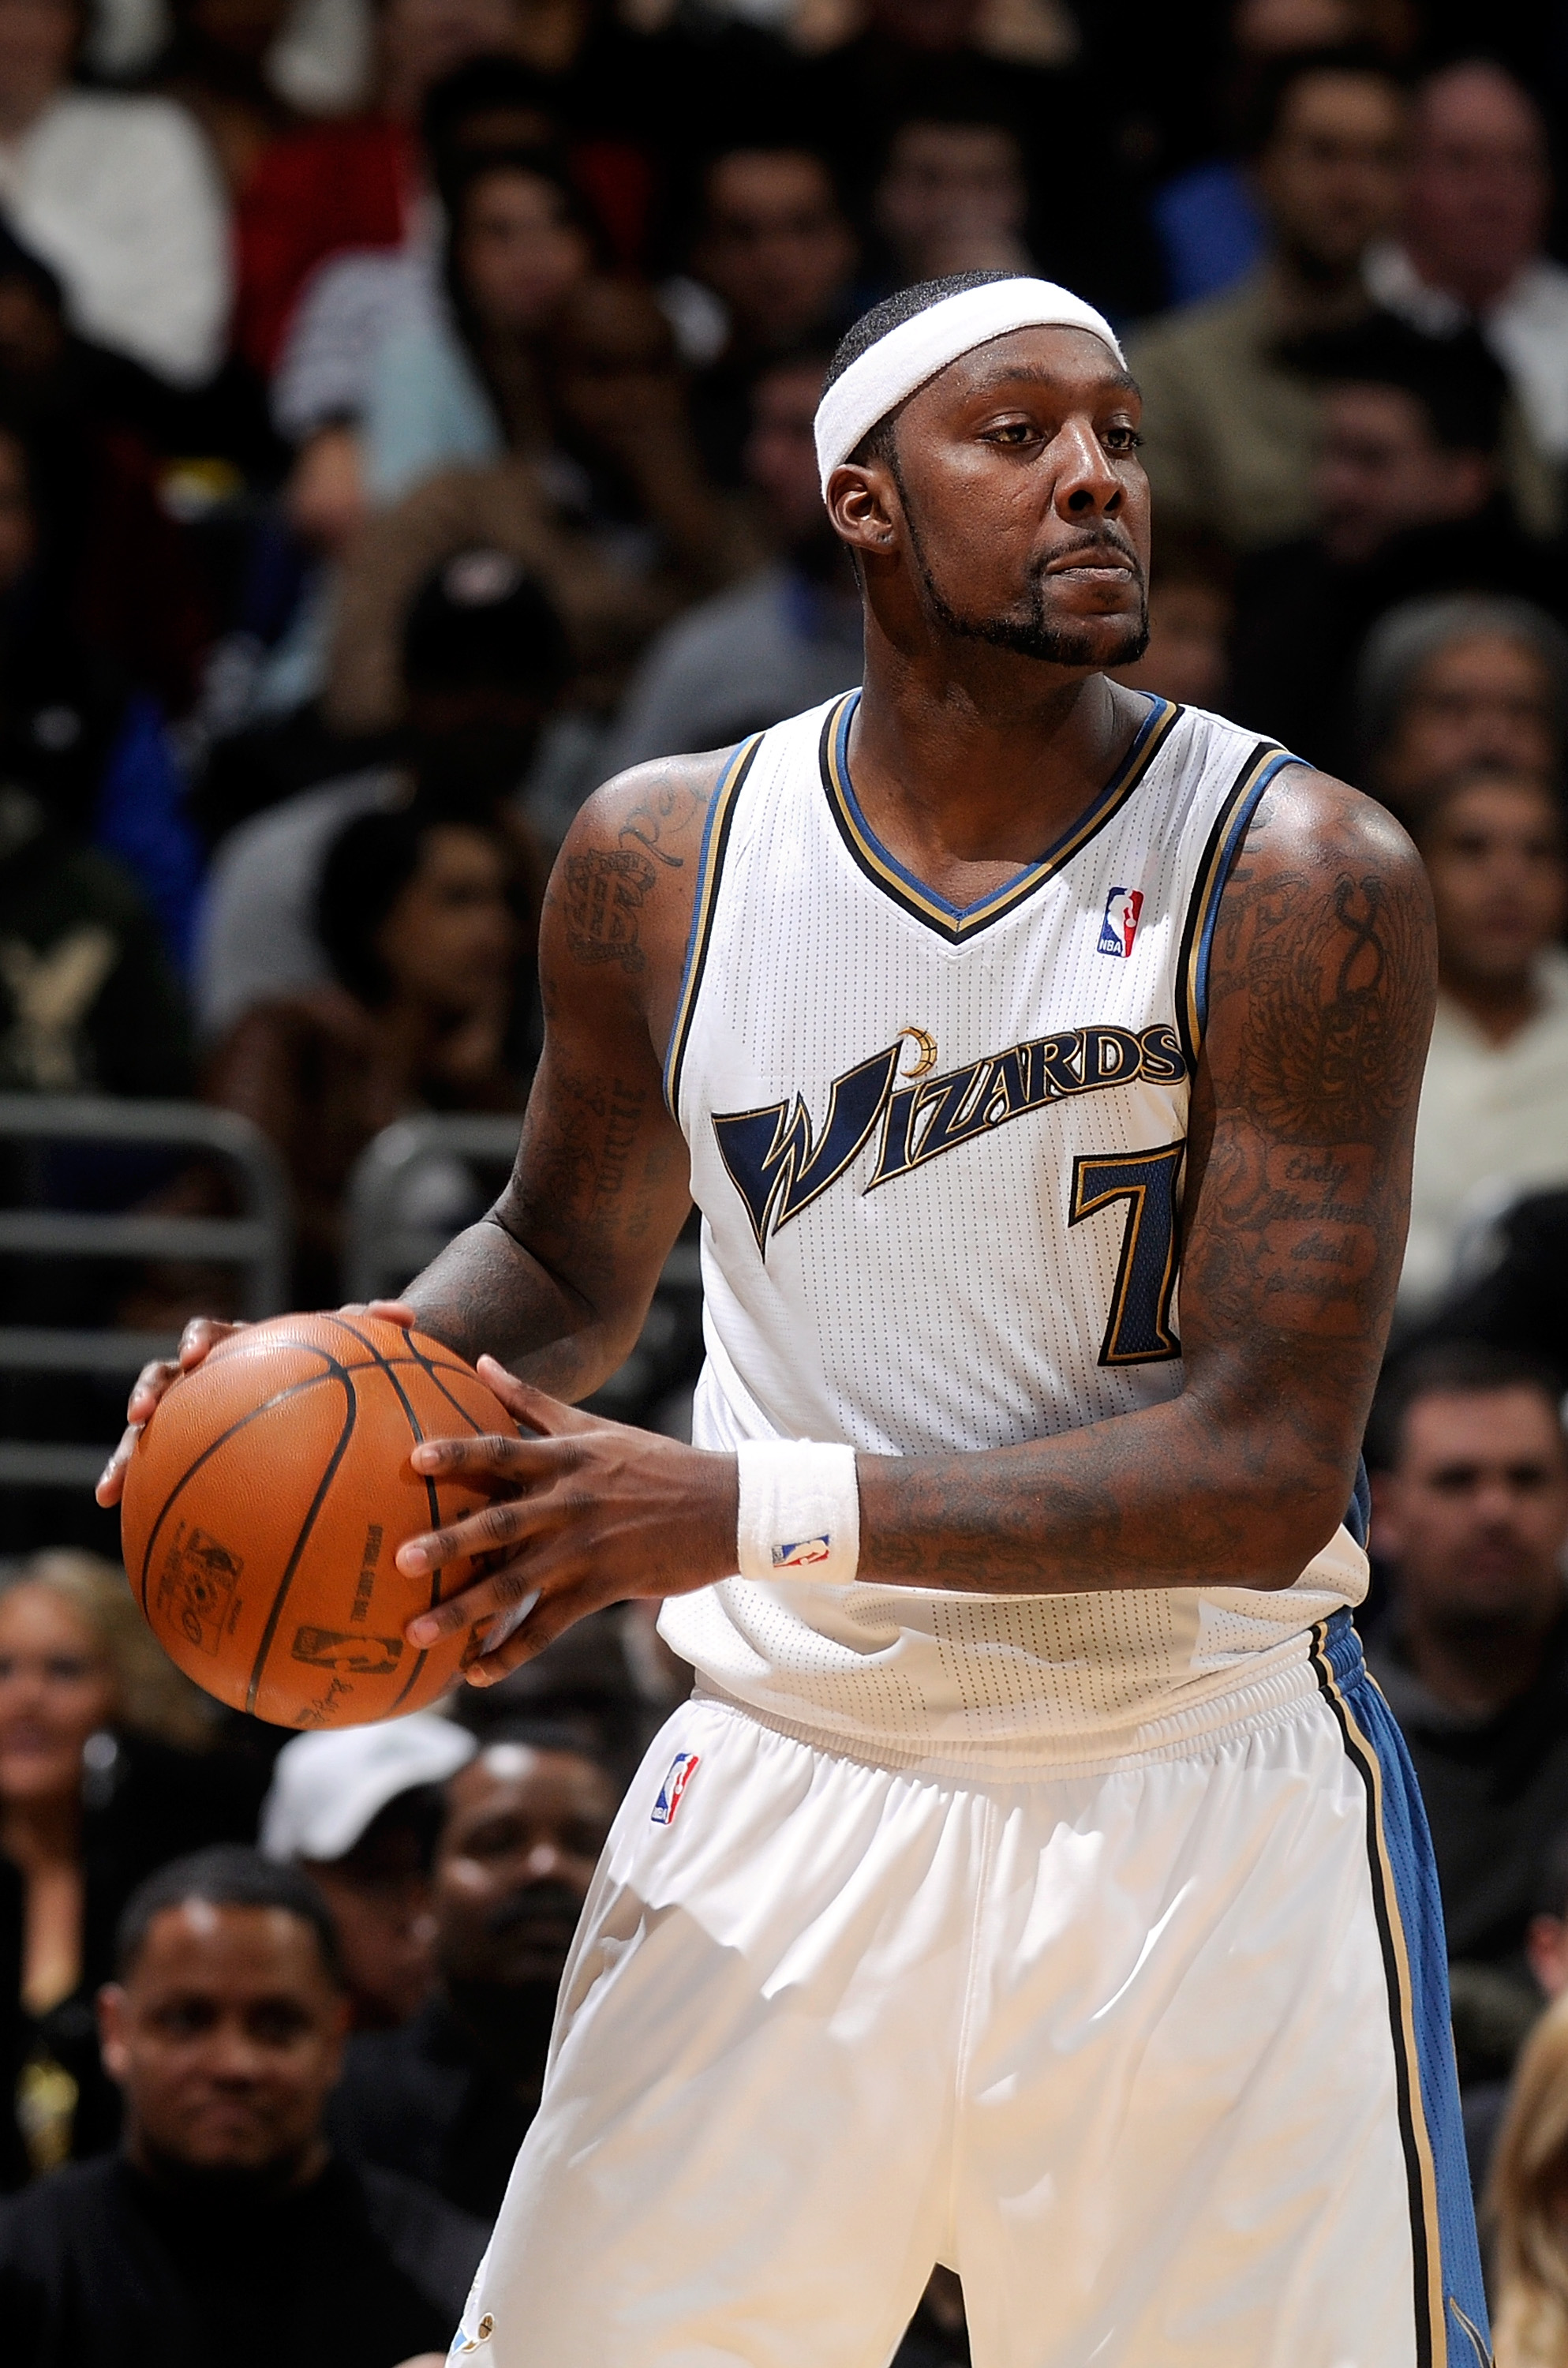 WASHINGTON, DC - DECEMBER 18:  Andray Blatche #7 of the Washington Wizards handles the ball against the Miami Heat at the Verizon Center on December 18, 2010 in Washington, DC. NOTE TO USER: User expressly acknowledges and agrees that, by downloading and